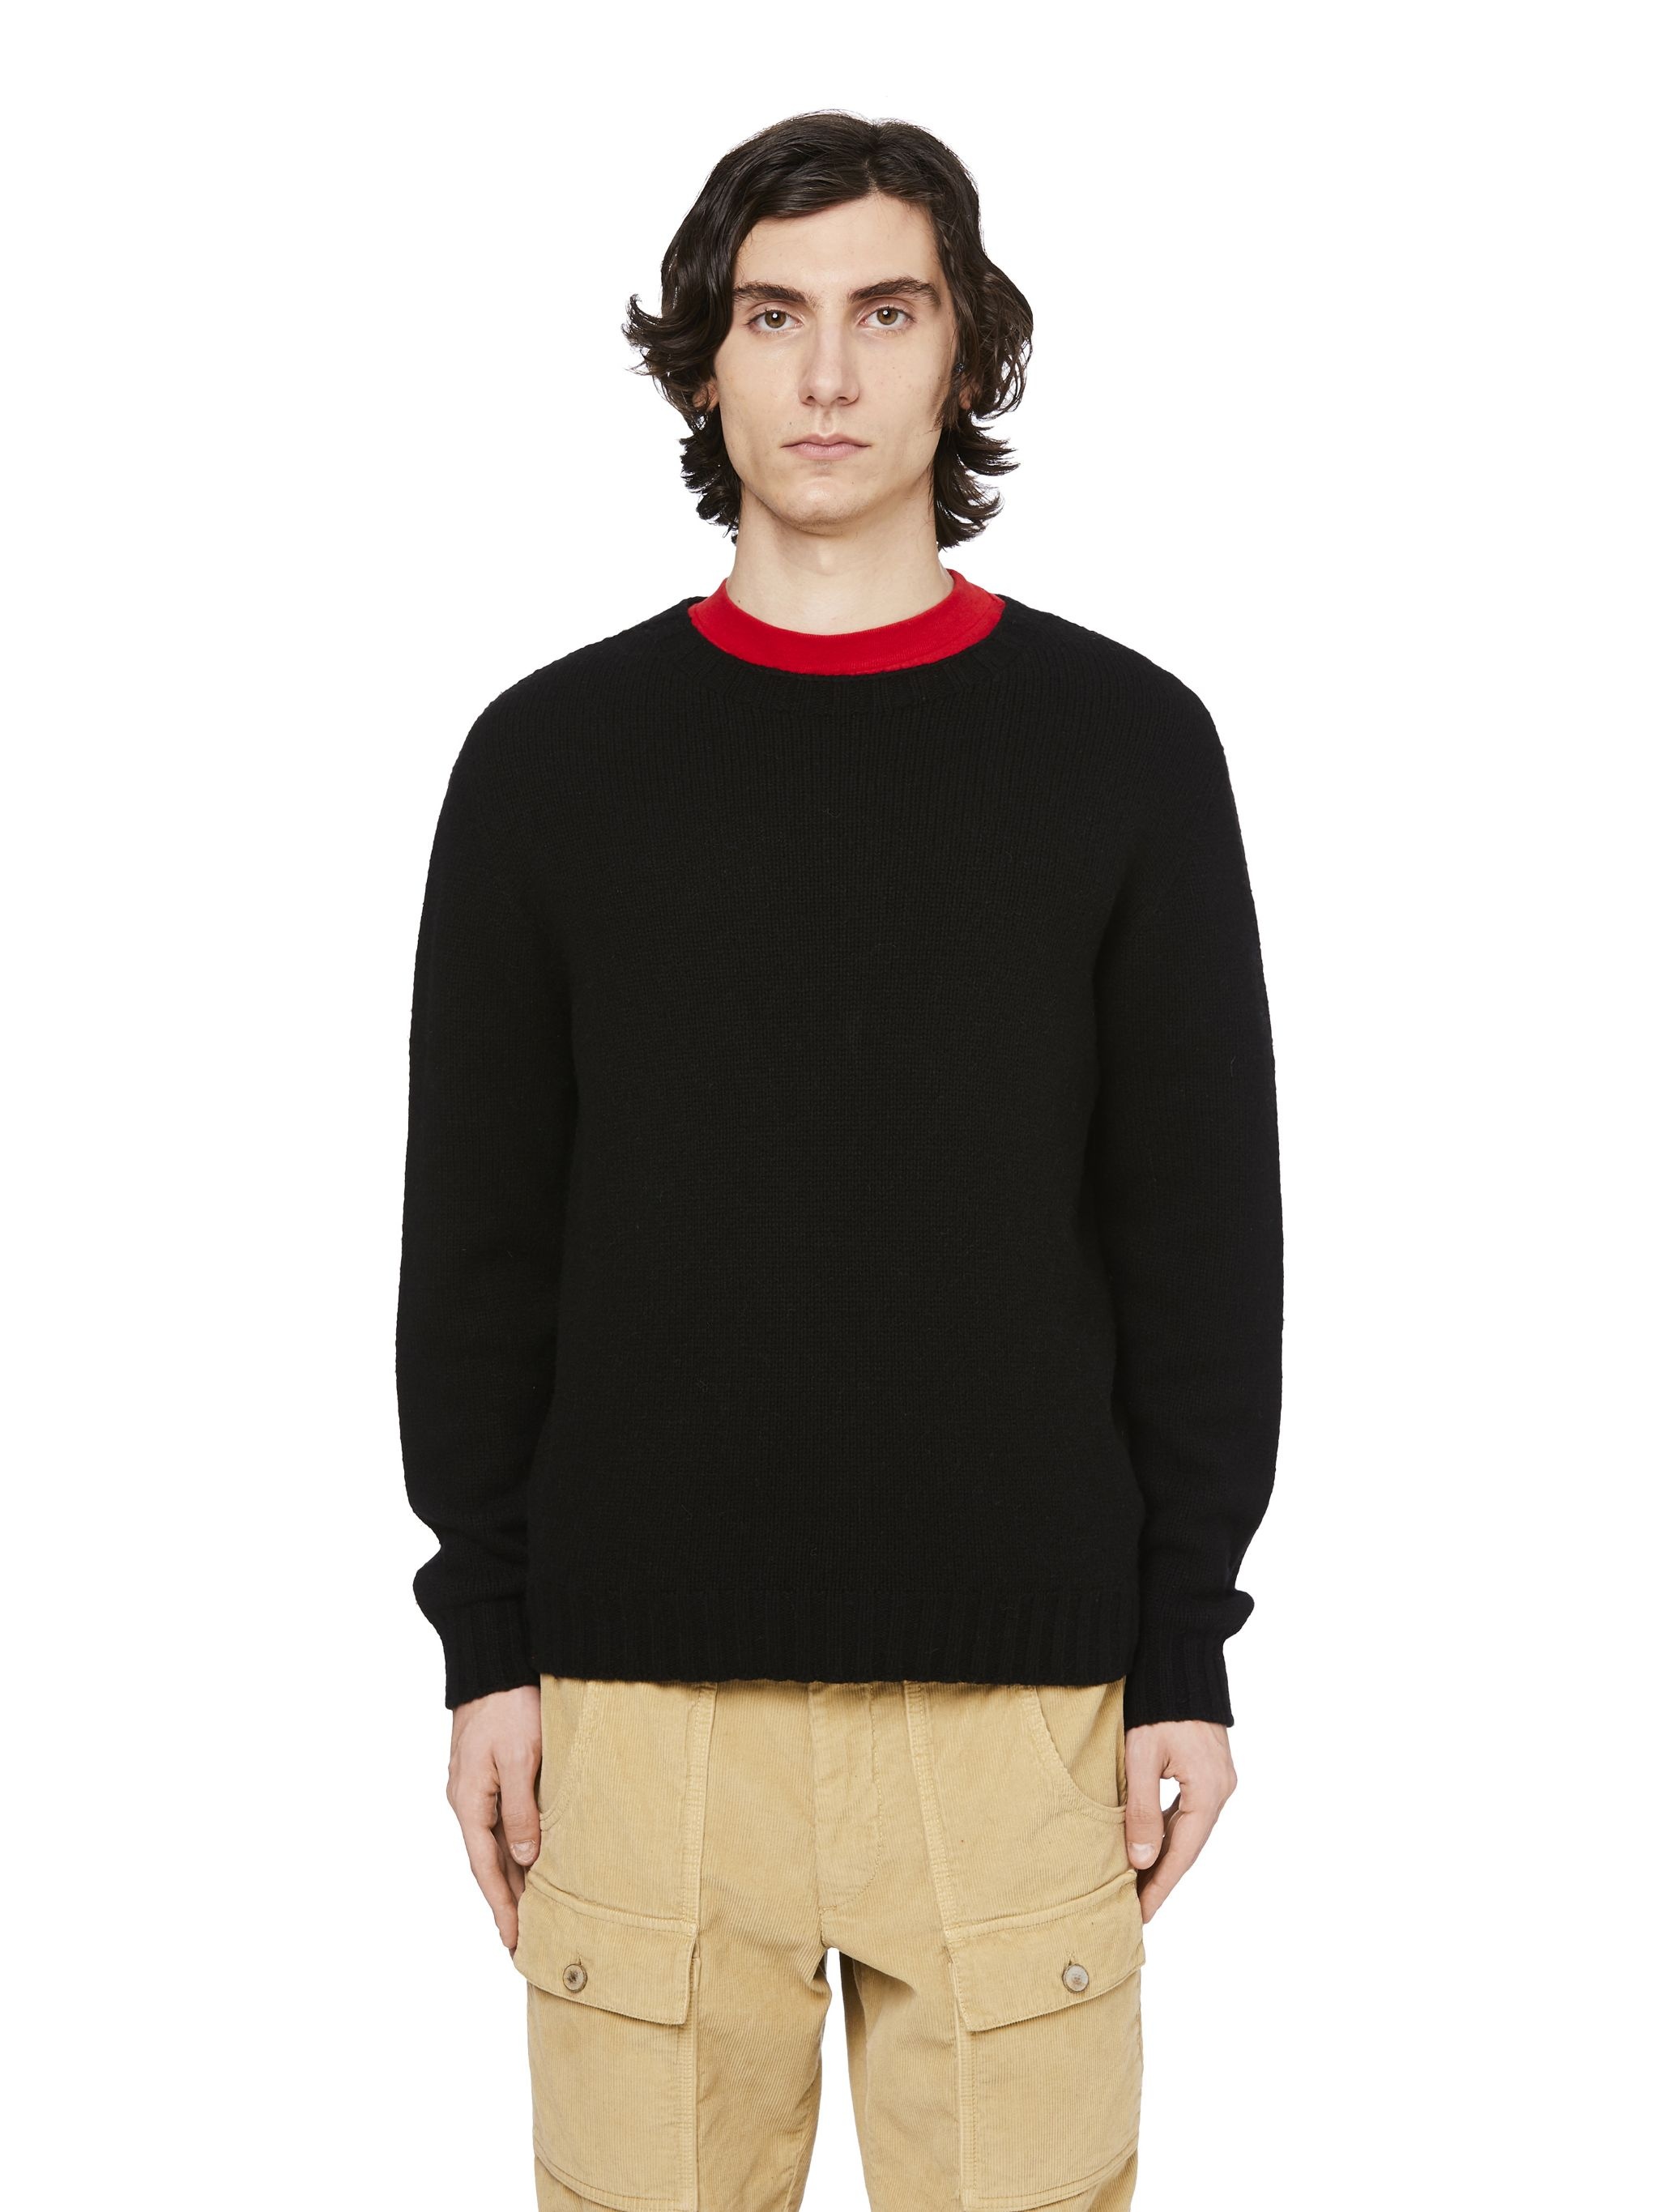 CURVED LOGO SWEATER - 3